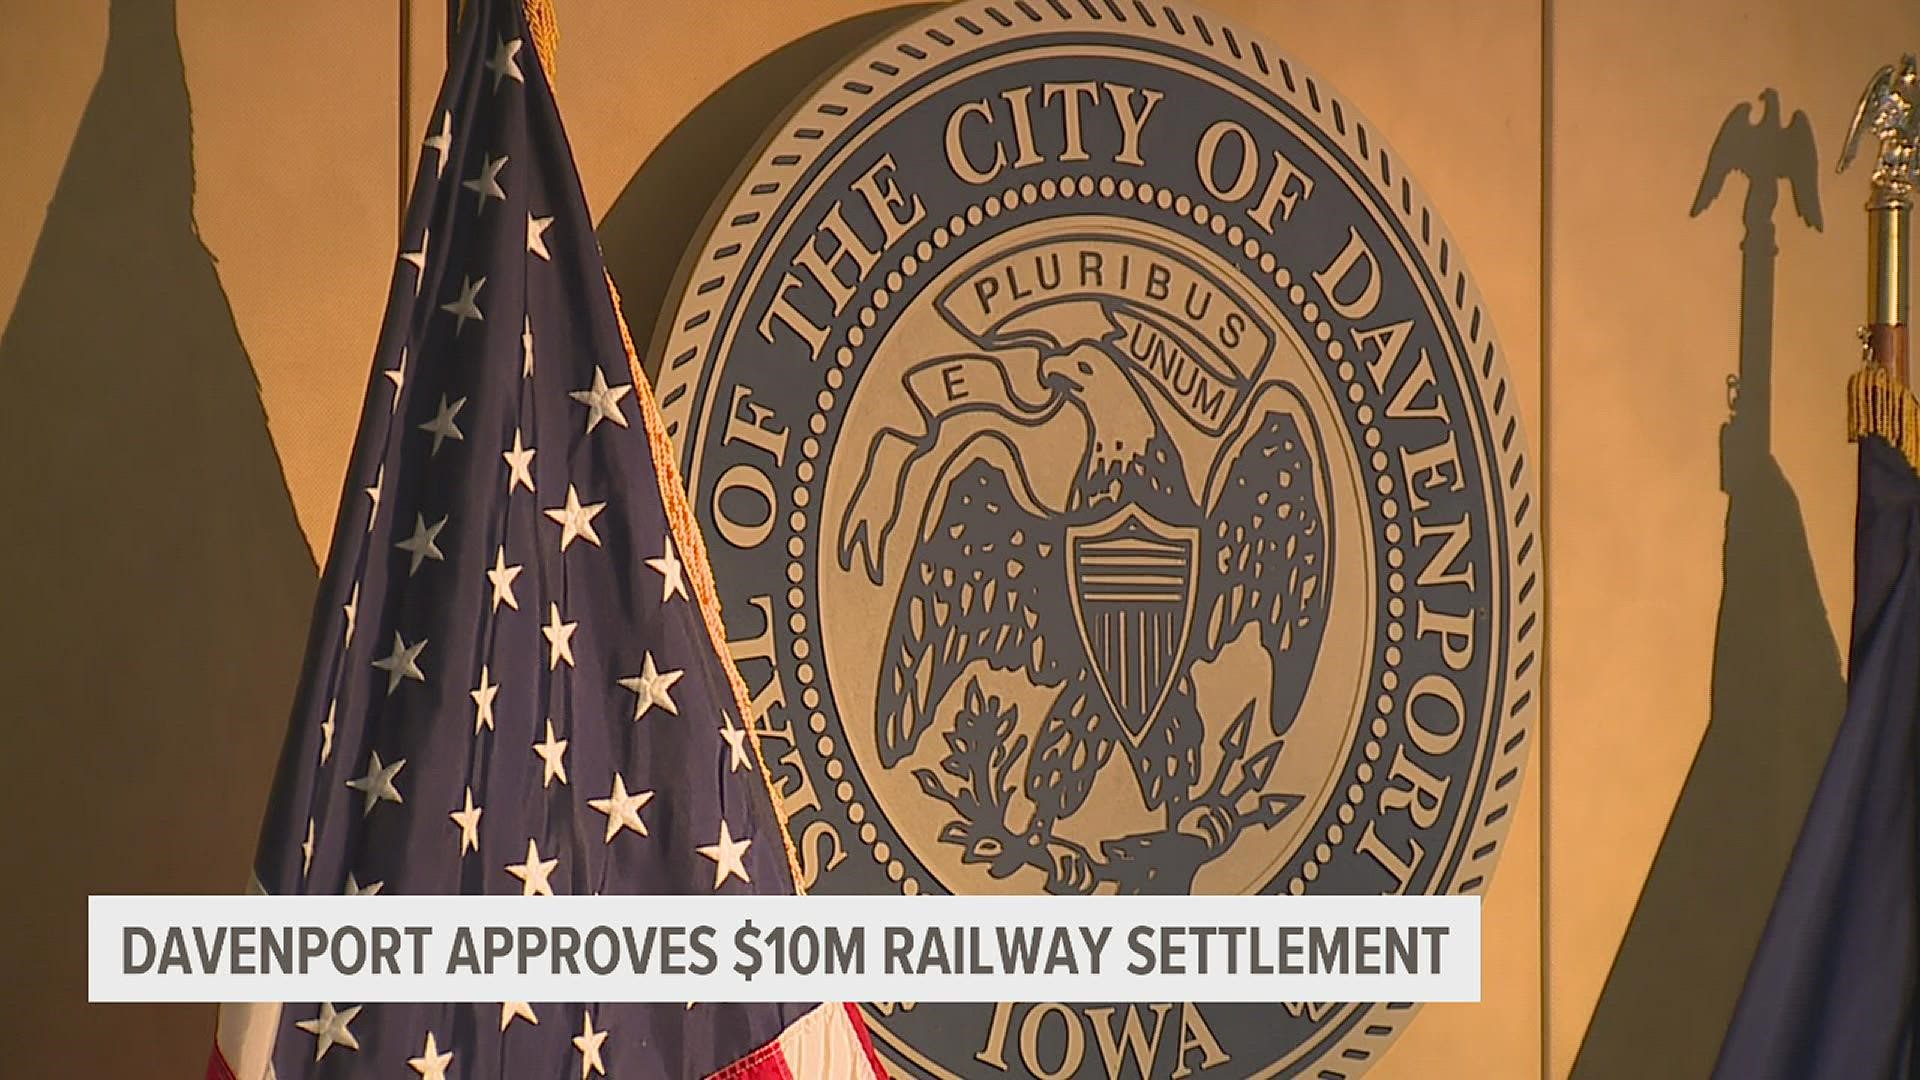 The City Council accepted the $10M deal from Canadian Pacific as part of accepting the merger with Kansas City Southern, disappointing many concerned residents.